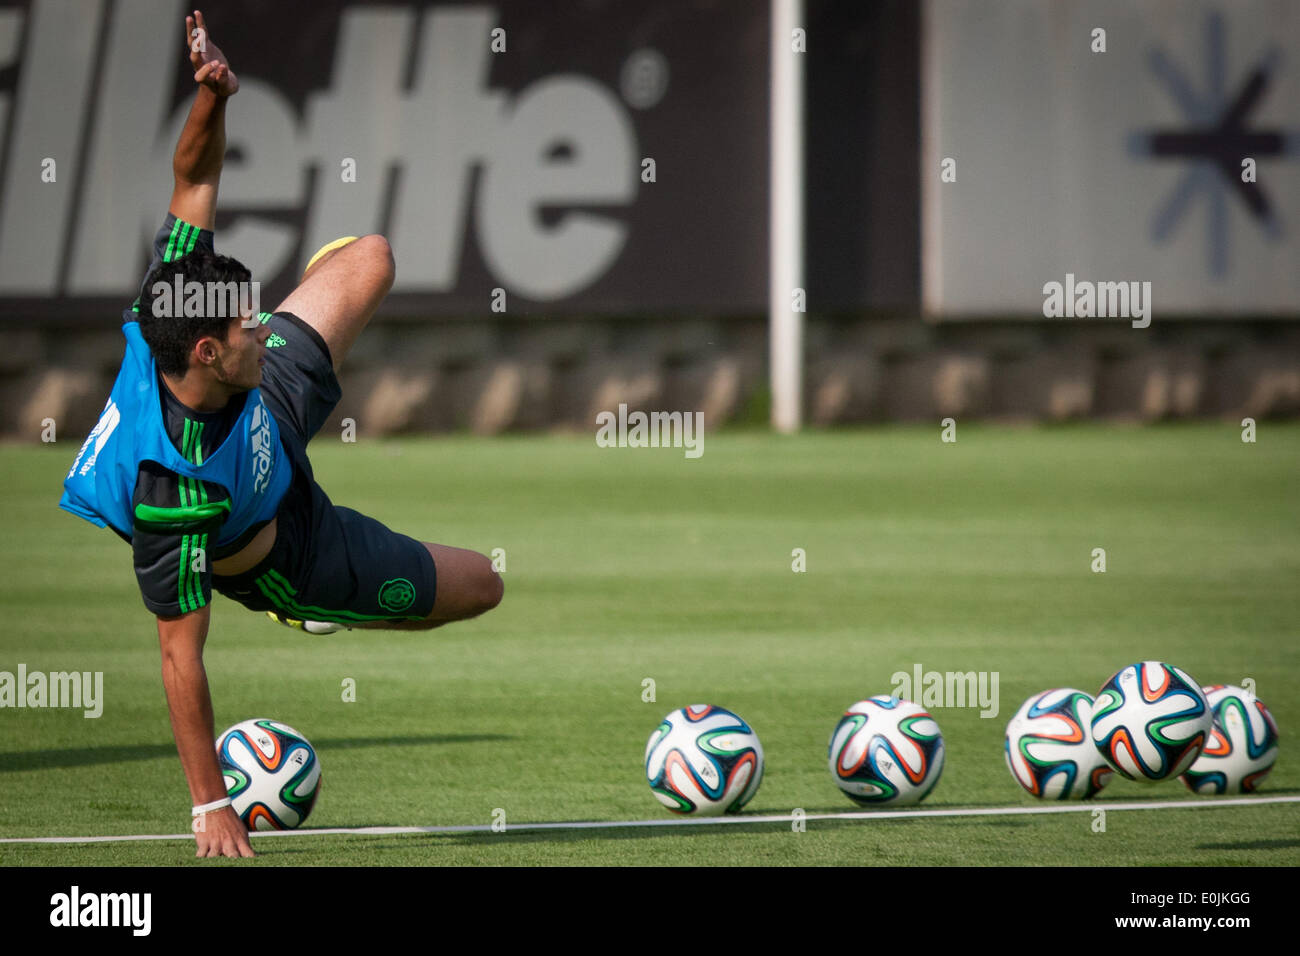 Mexico City, Mexico. 14th May, 2014. Raul Jimenez from Mexico's national soccer team takes part in a training session, in Mexico City, capital of Mexico, on May 14, 2014. Credit:  Pedro Mera/Xinhua/Alamy Live News Stock Photo